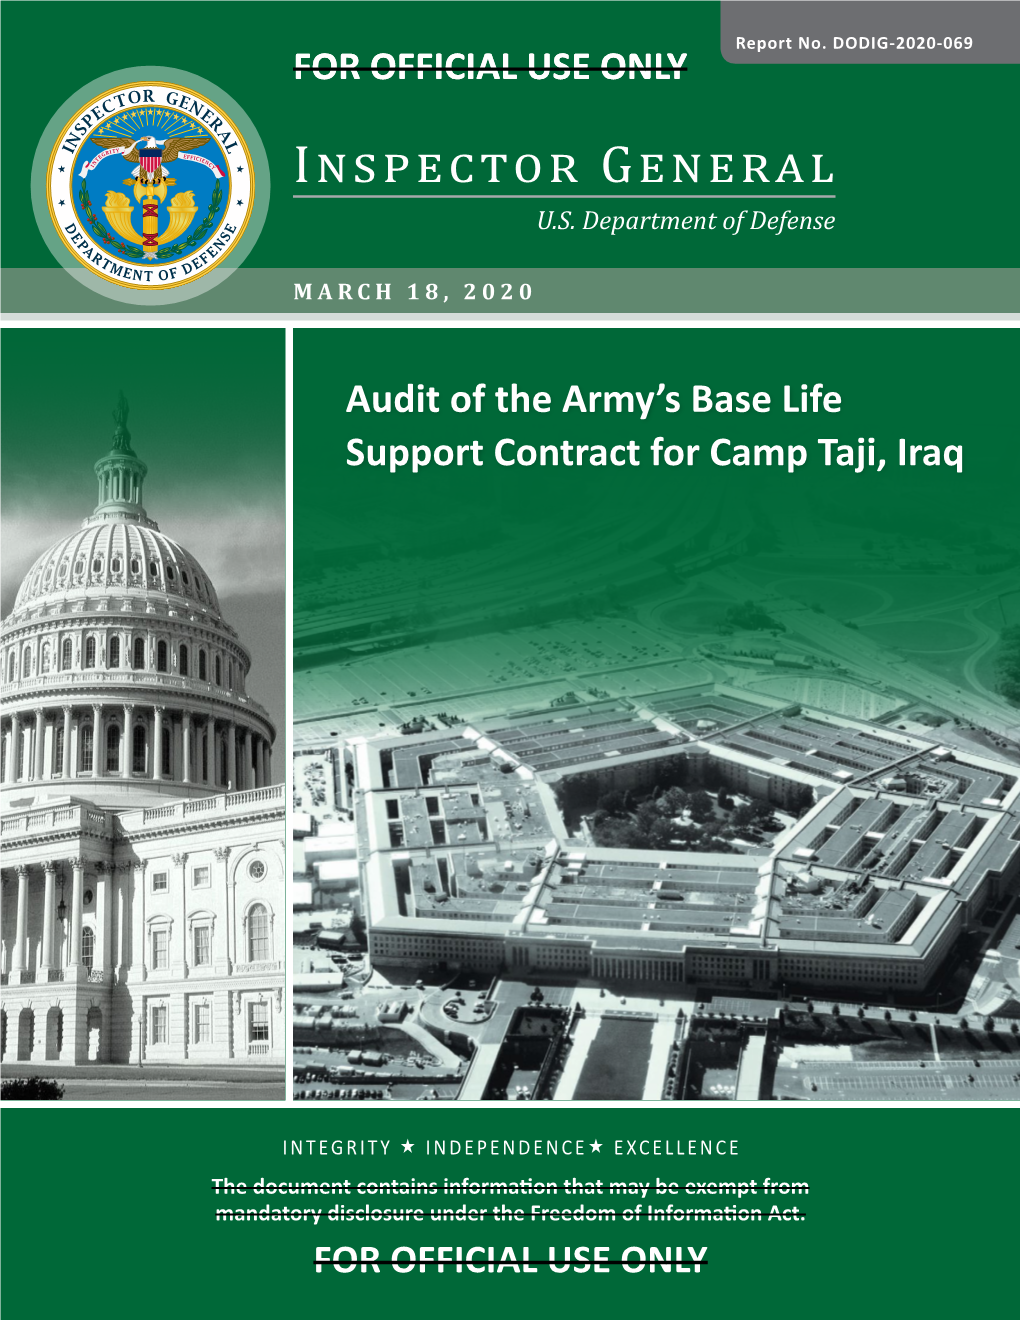 Audit of the Army's Base Life Support Contract for Camp Taji, Iraq